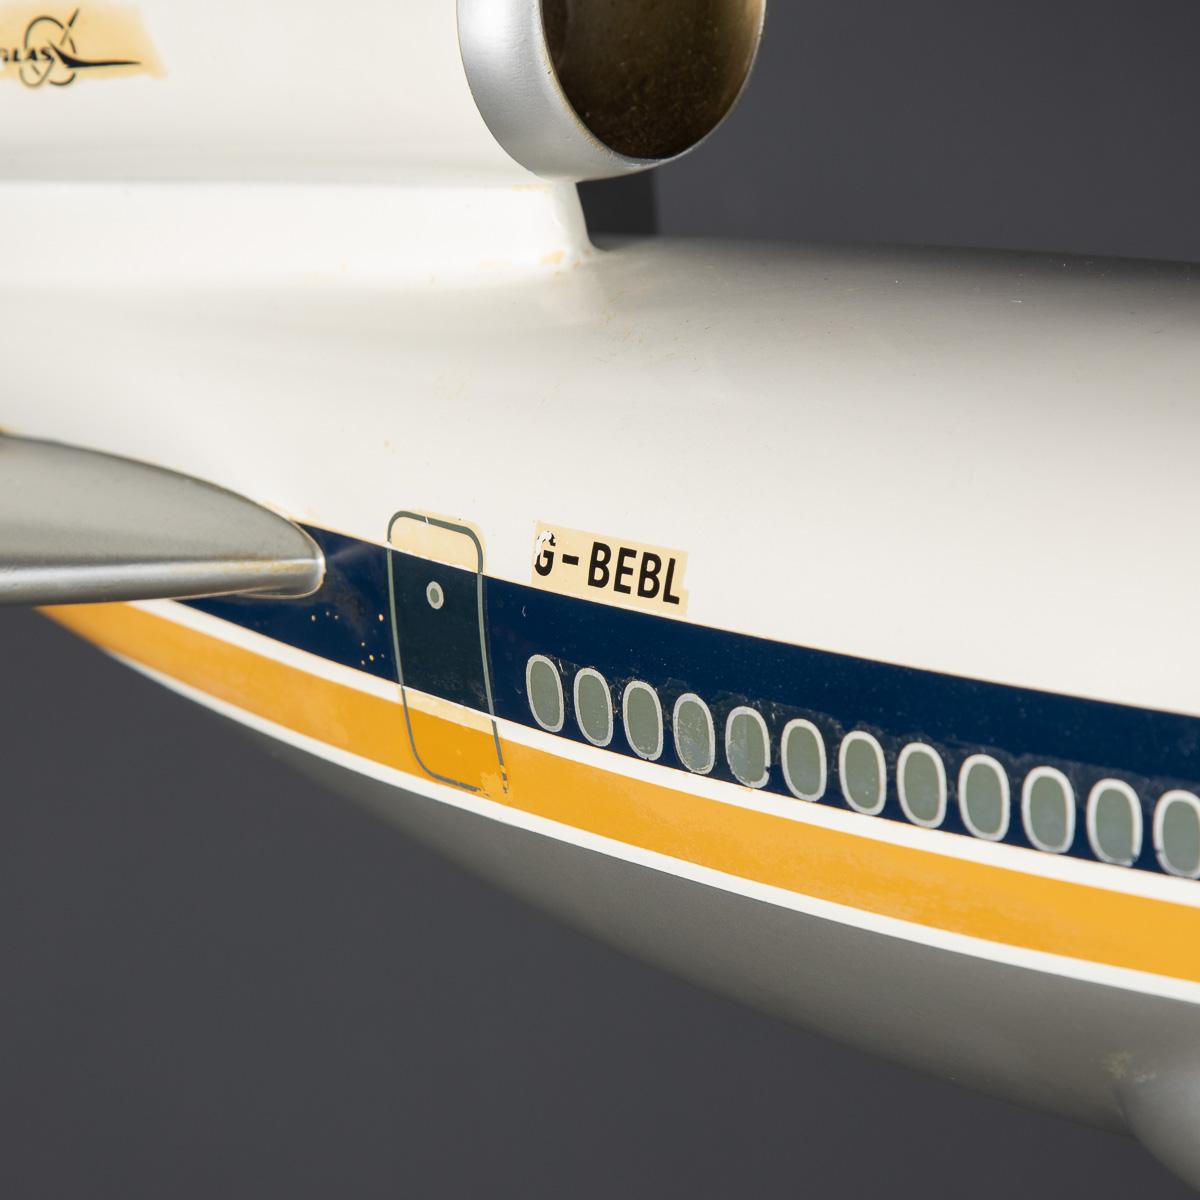 20th Century British Caledonian Dc10 Fibre Glass Airplane Model, c.1970 For Sale 7